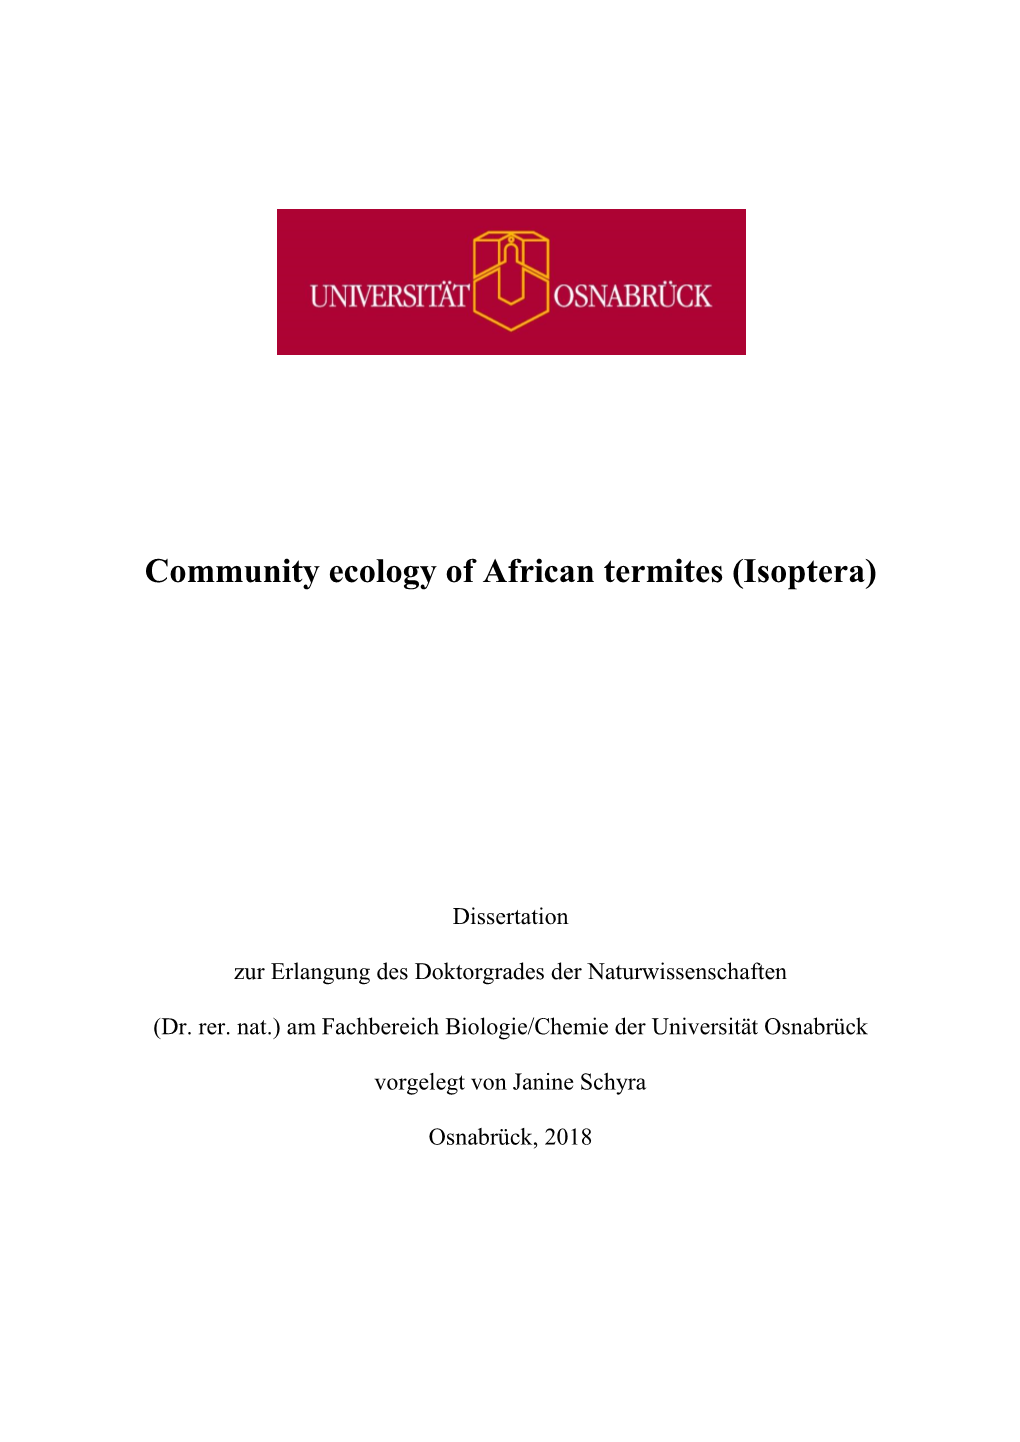 Community Ecology of African Termites (Isoptera)